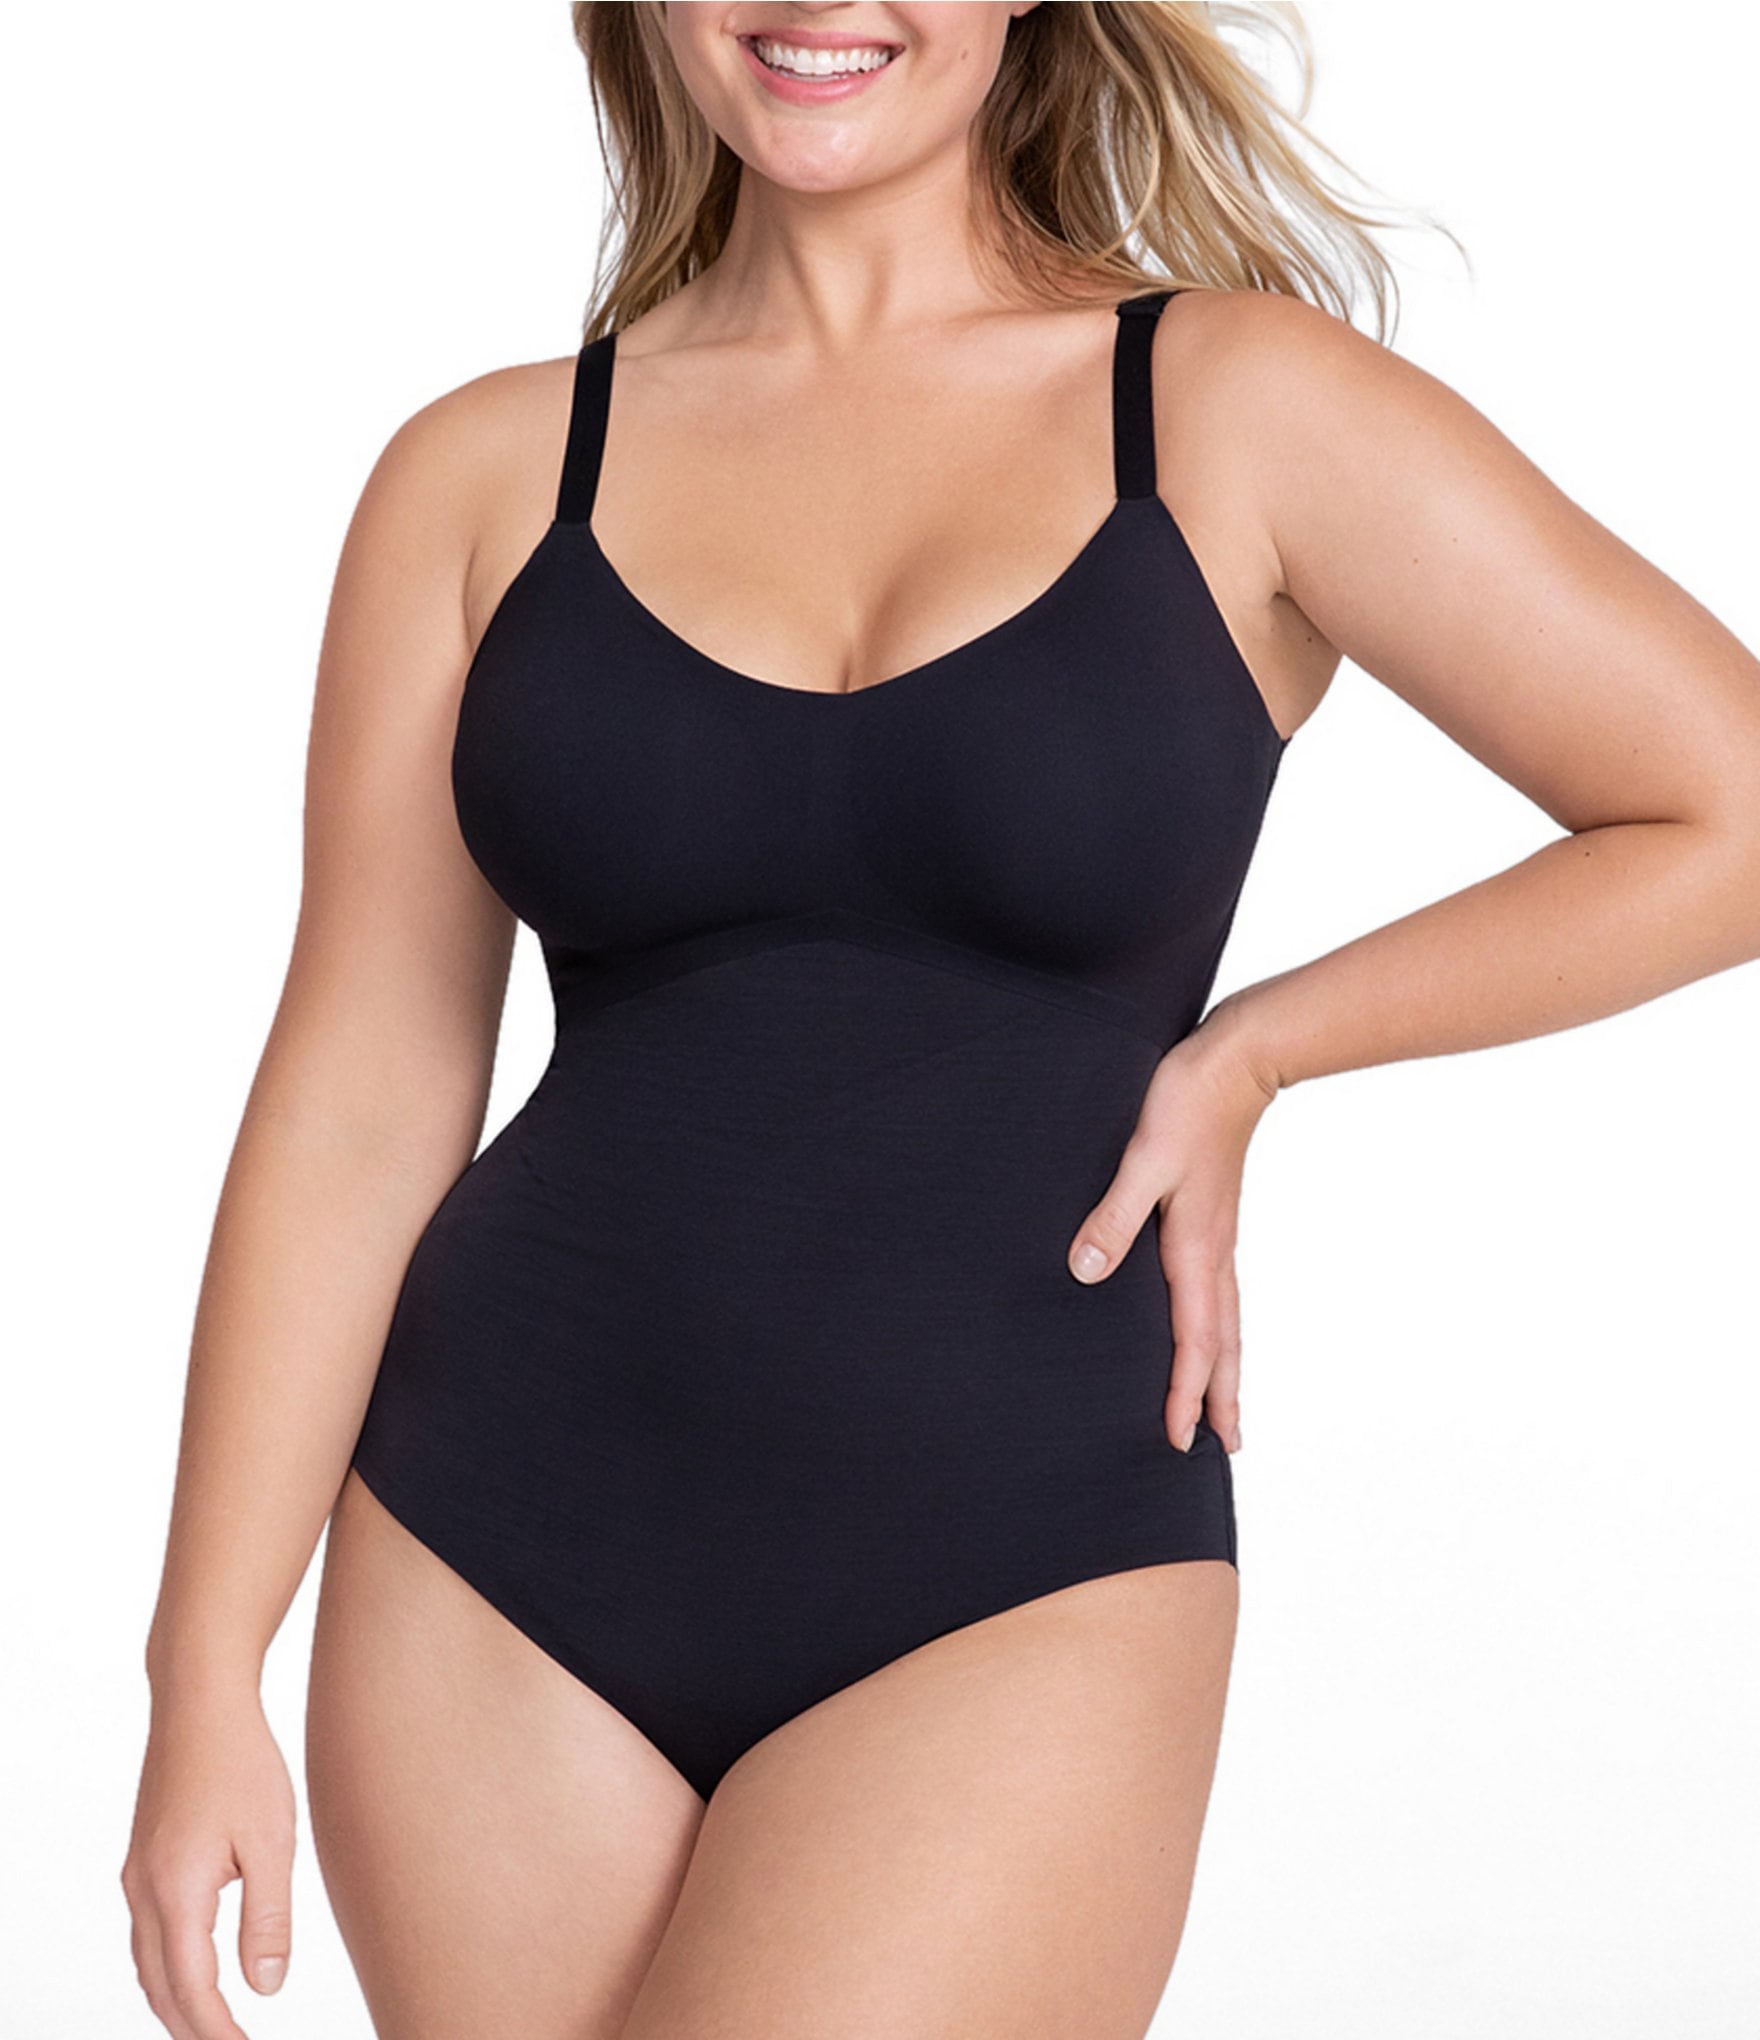 outlets prices New Honeylove Cami Bodysuit Shapewear